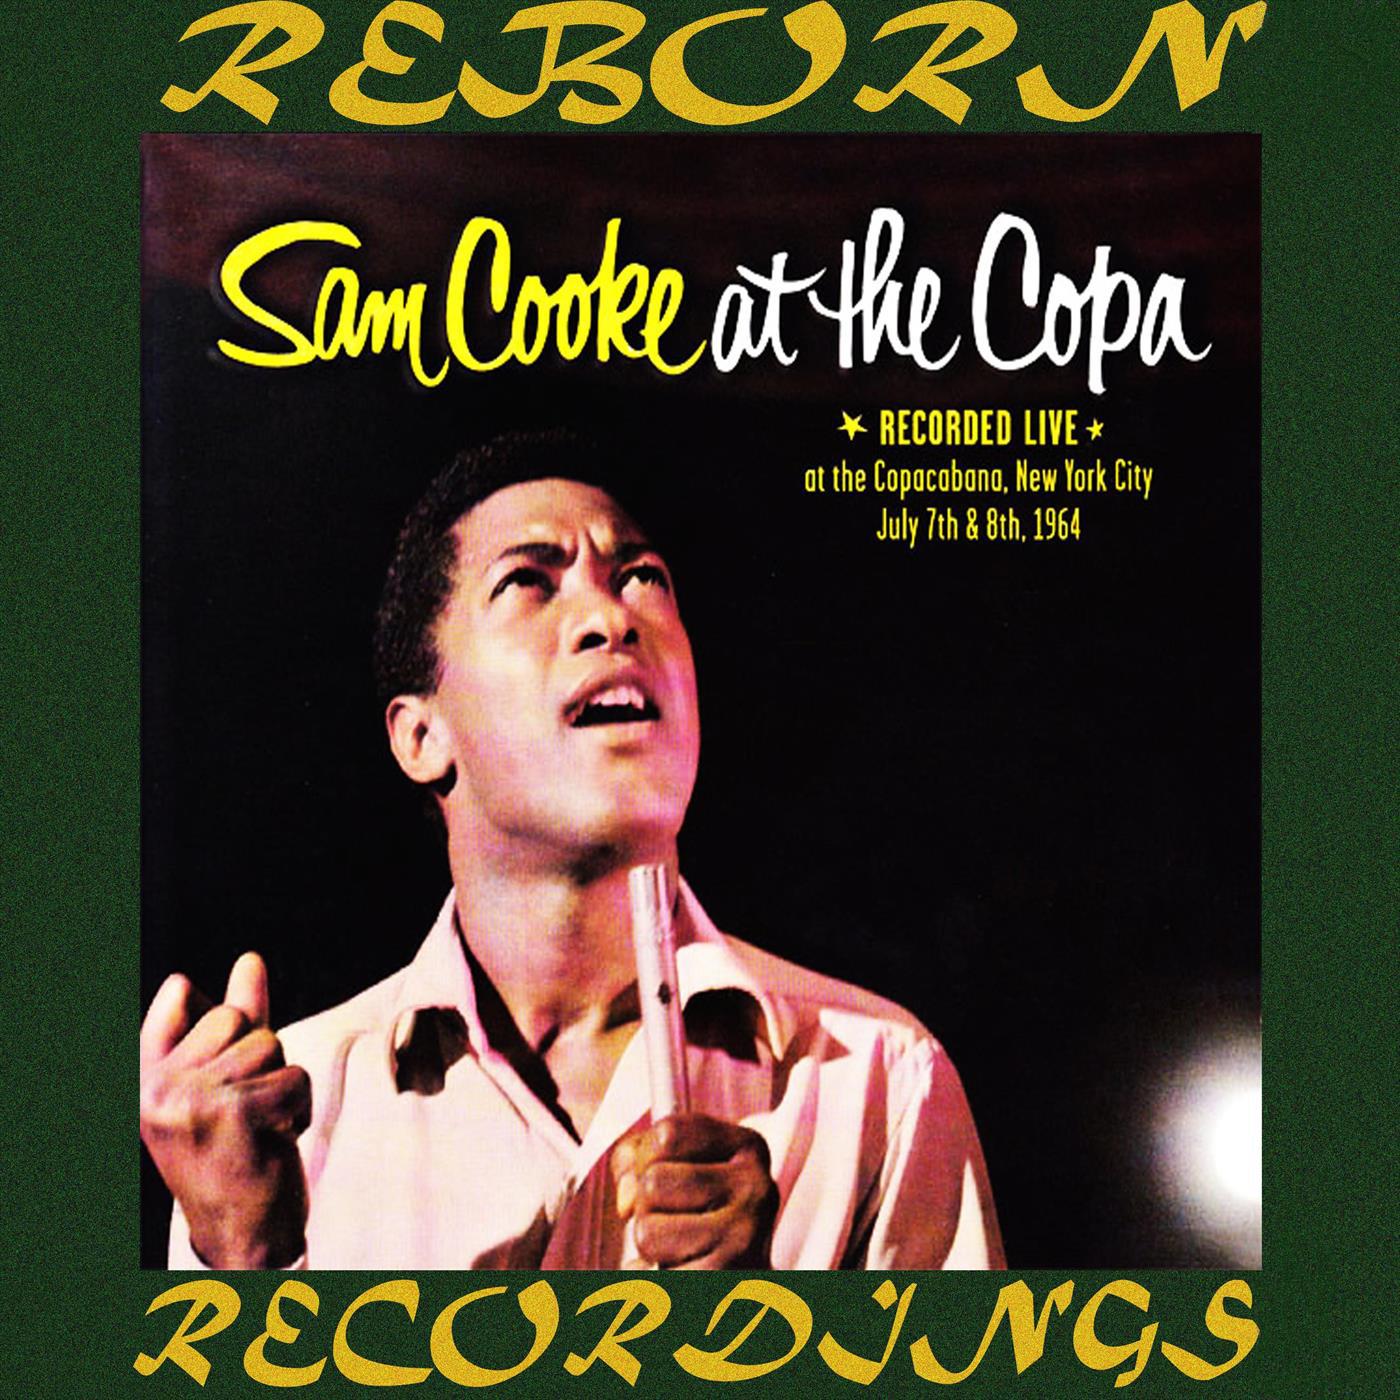 Sam Cooke at the Copa (HD Remastered)